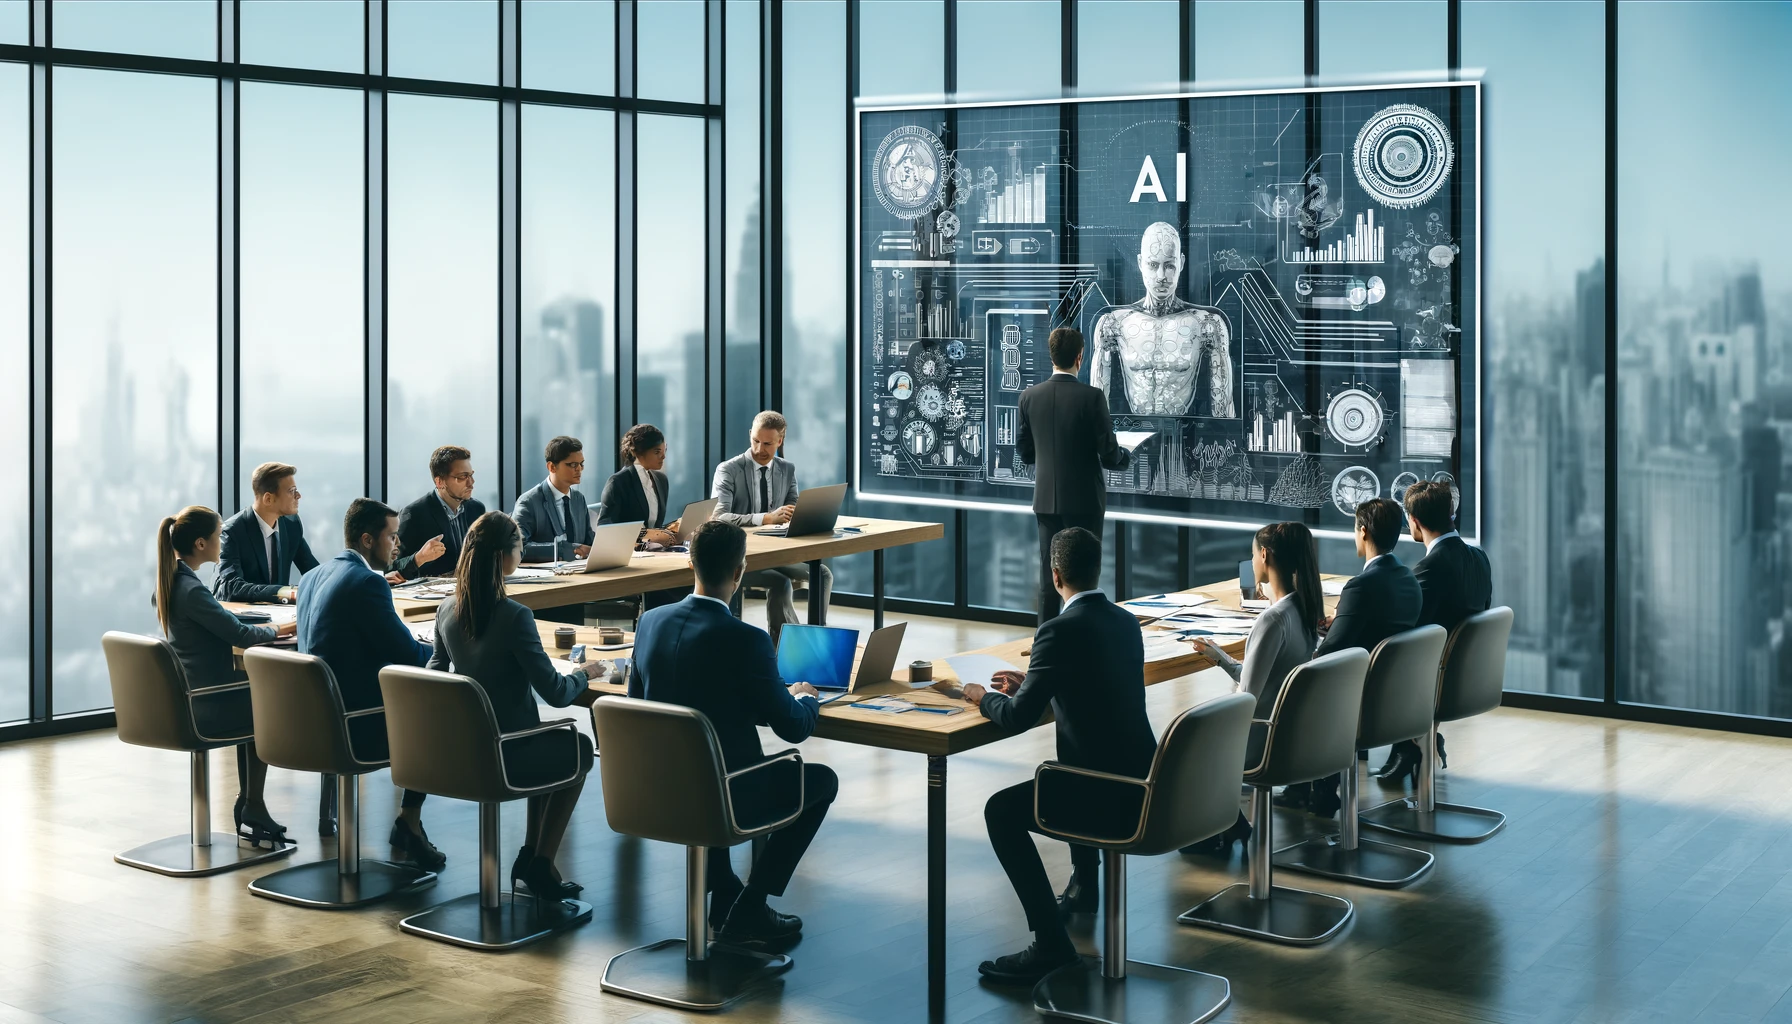 A group of business professionals in a modern office environment working on AI regulatory compliance.